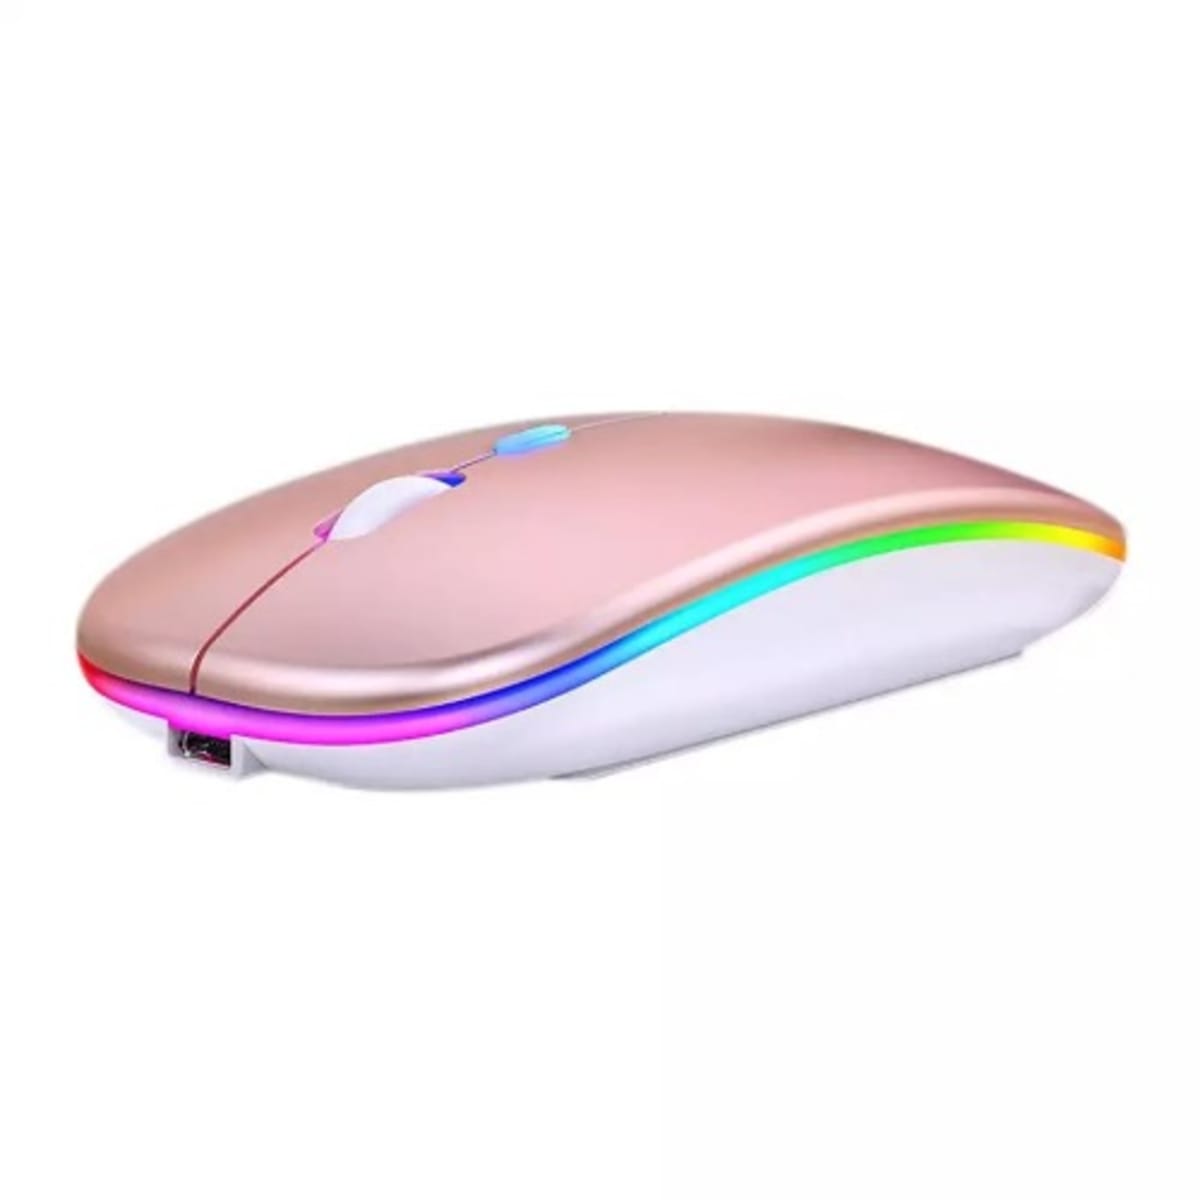 Wireless Rechargeable Mouse For Phones, Tablet, Android/IOS